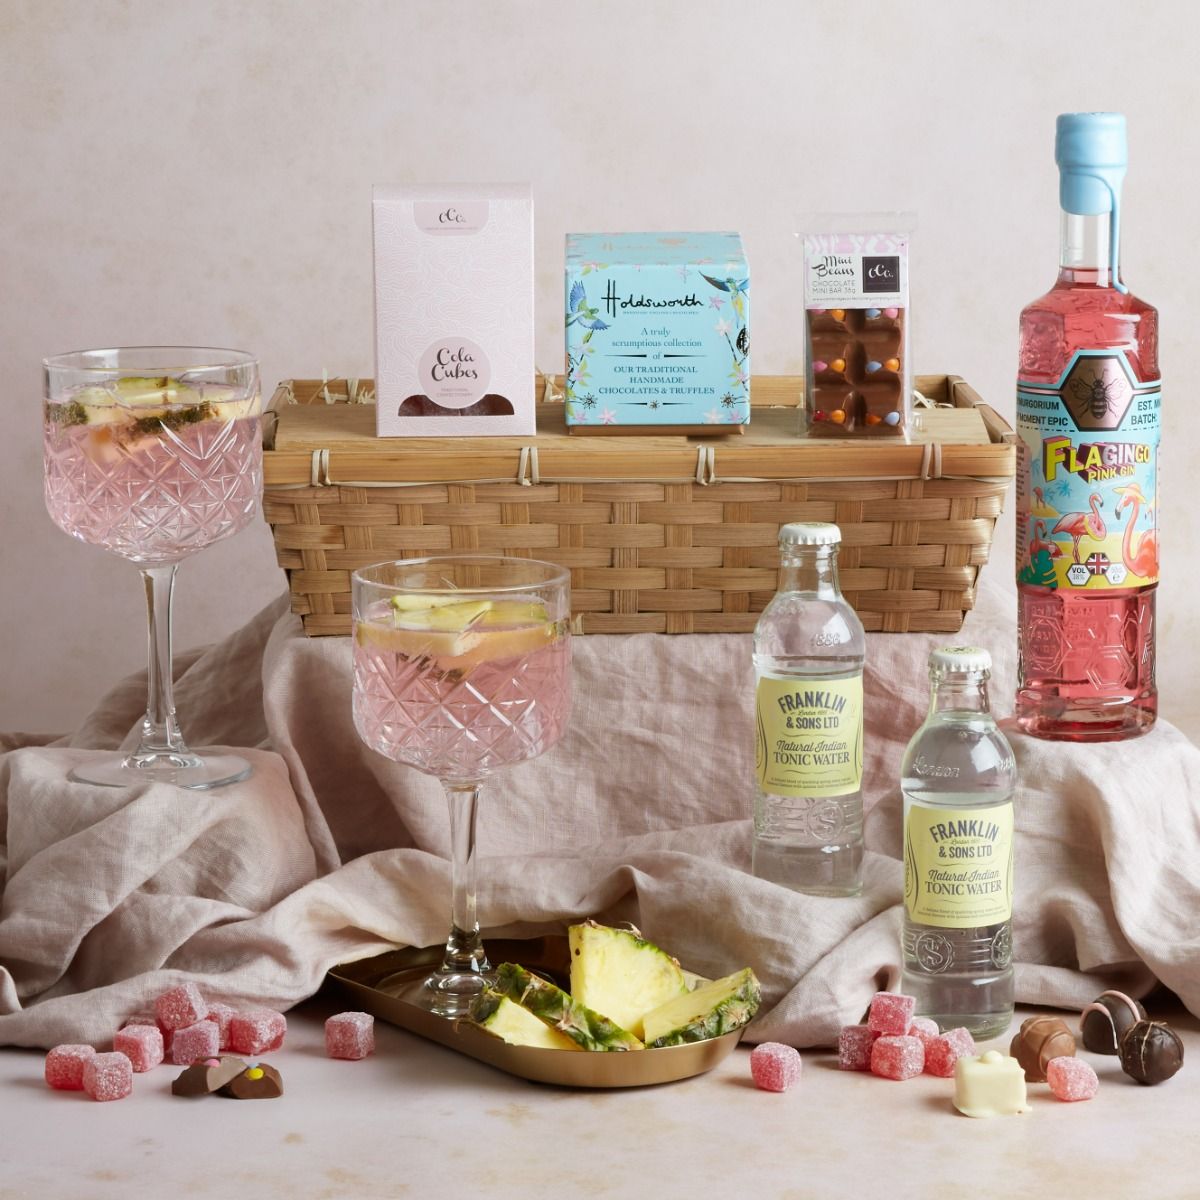 The Flagingo pink gin hamper with contents on display, a G&T in a glass and with its wicker basket